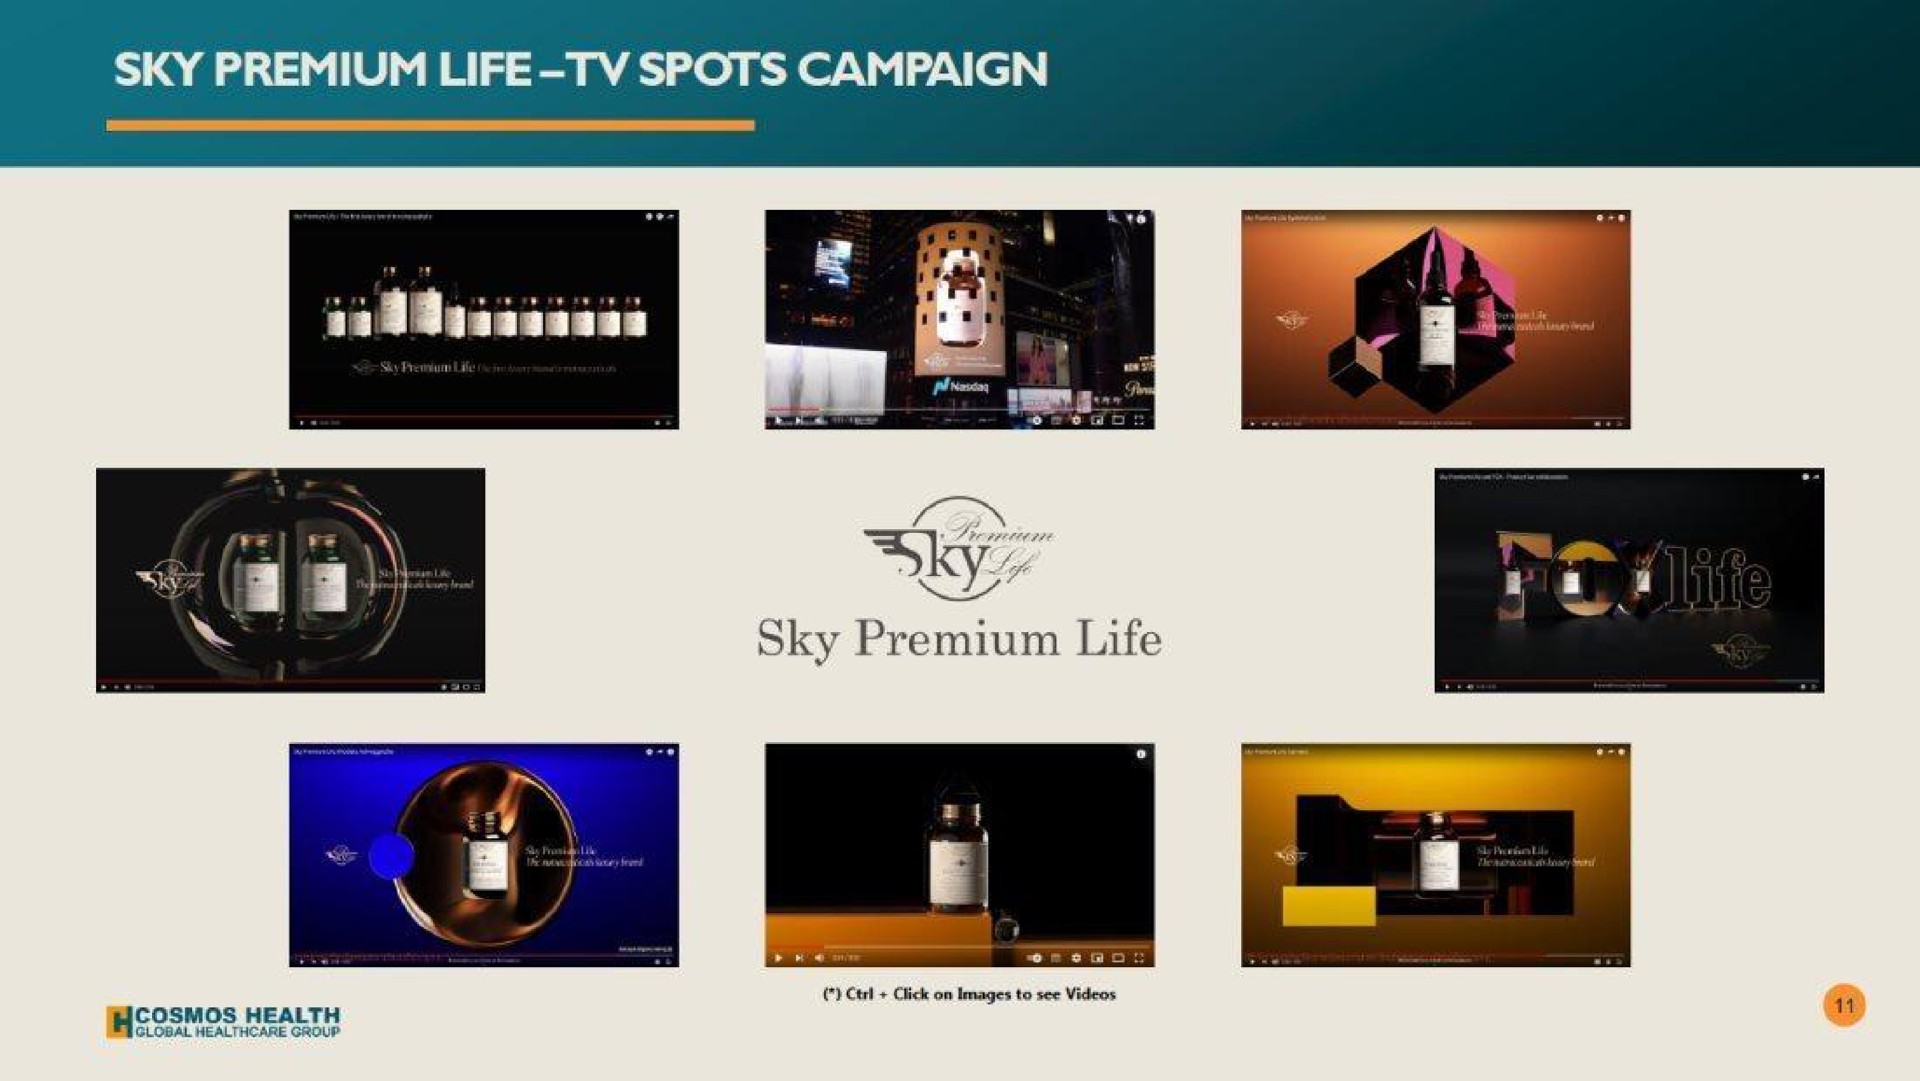 sky premium life spots campaign | Cosmos Holdings